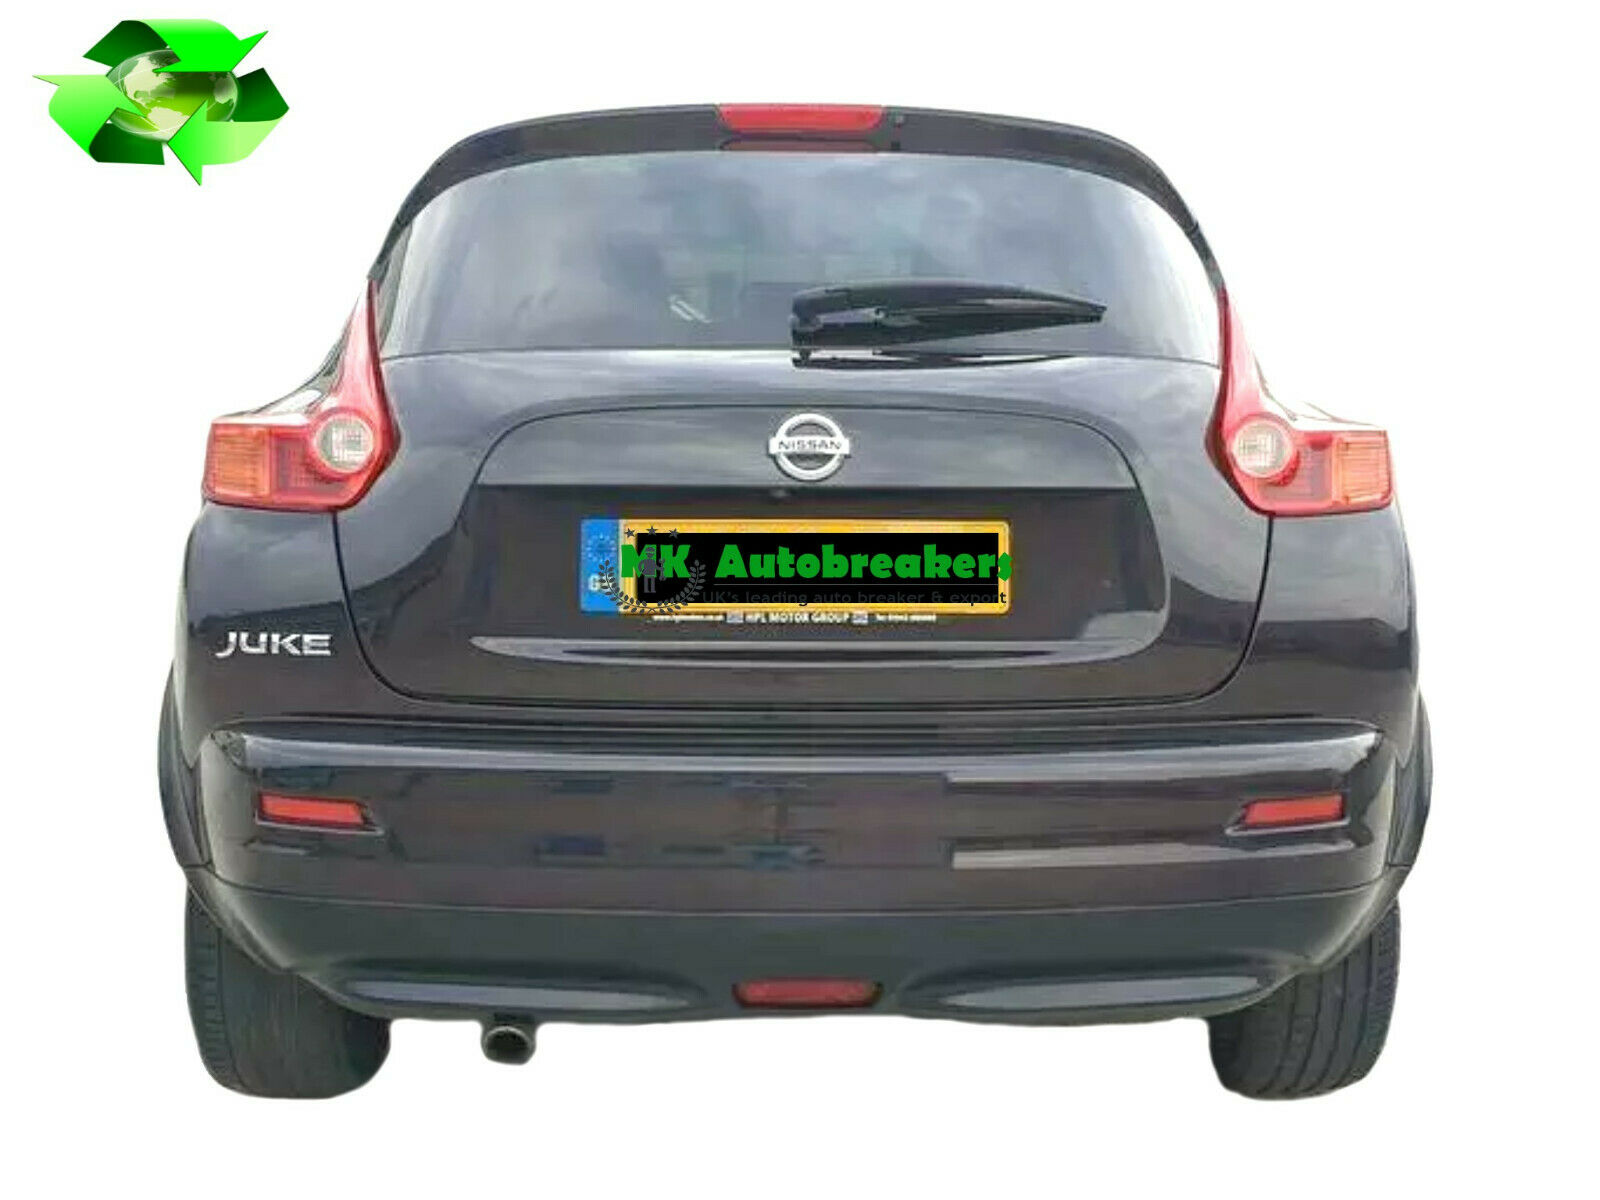 NISSAN JUKE 2010 - 2014 REAR WHEEL ARCH TRIM RIGHT MOULDING OUTER